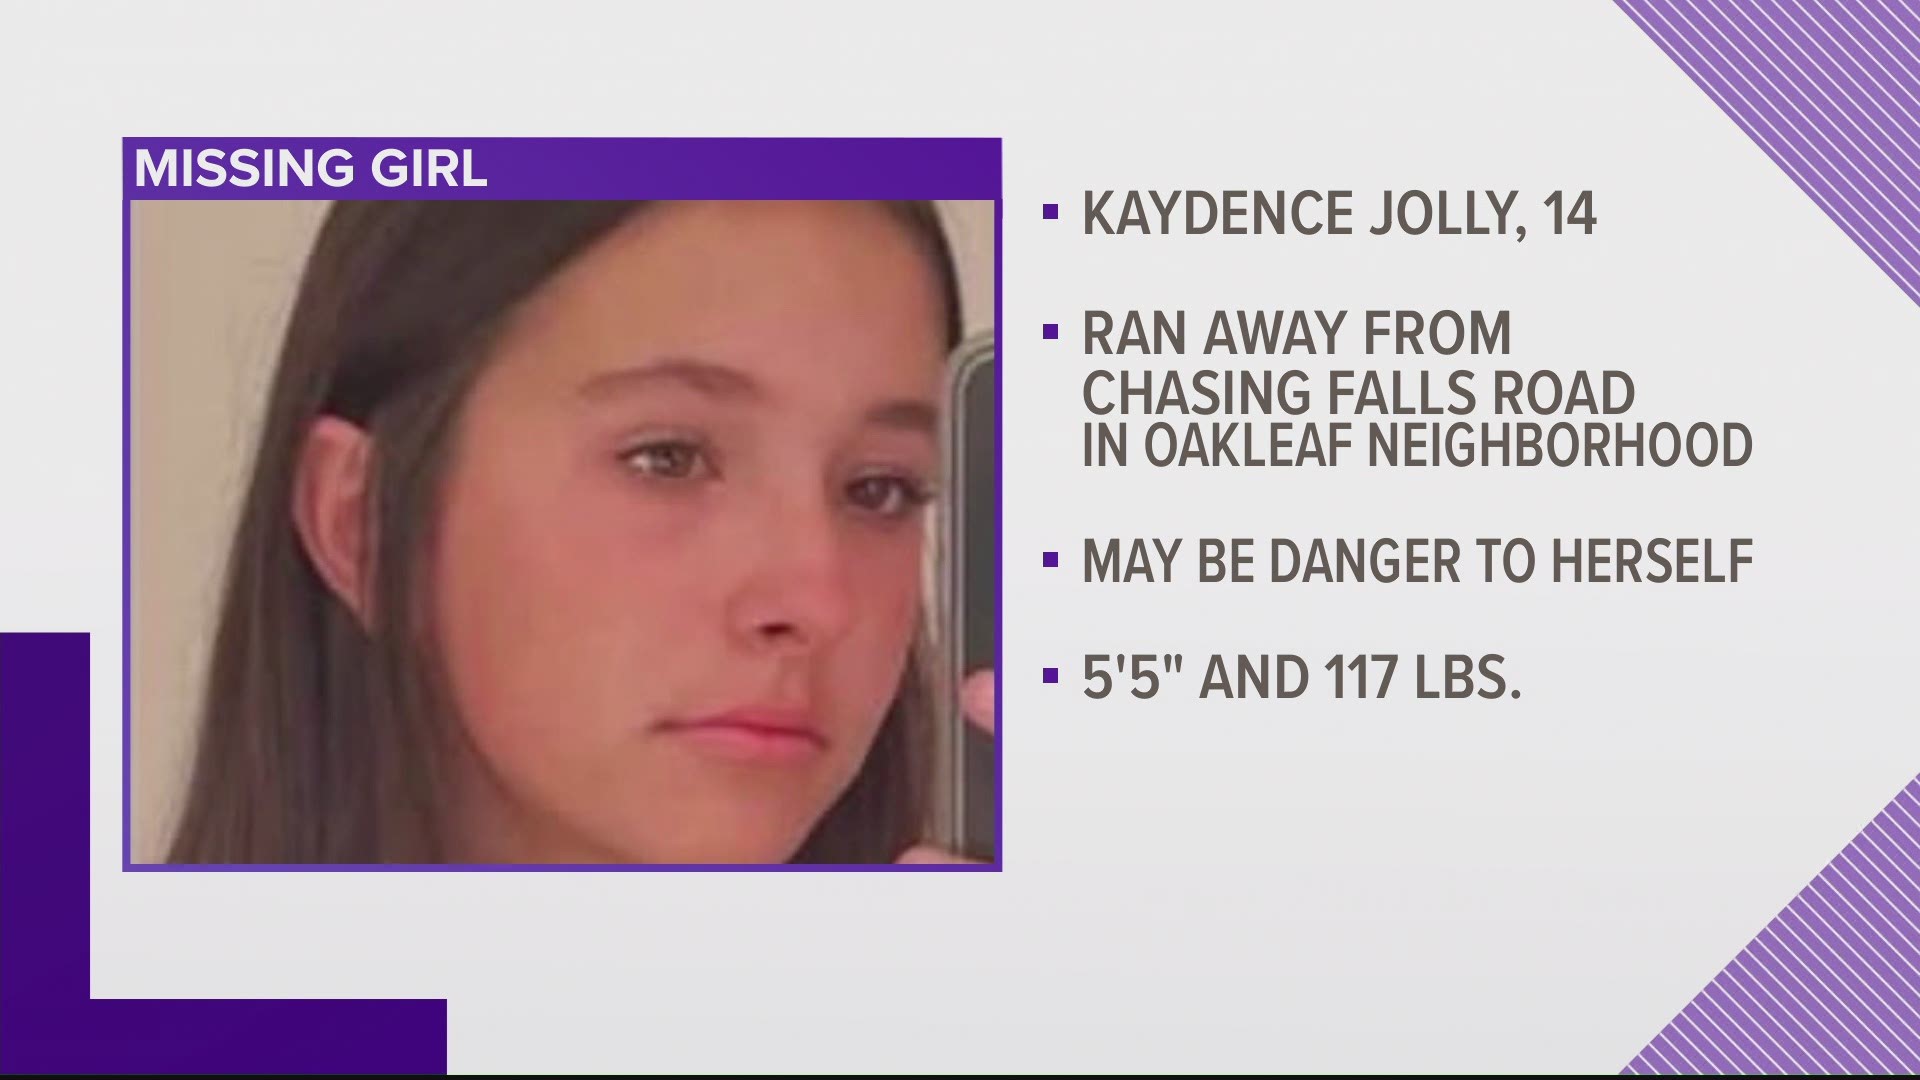 The Clay County Sheriff's Office believes Kaydence Jolly may be a danger to herself.